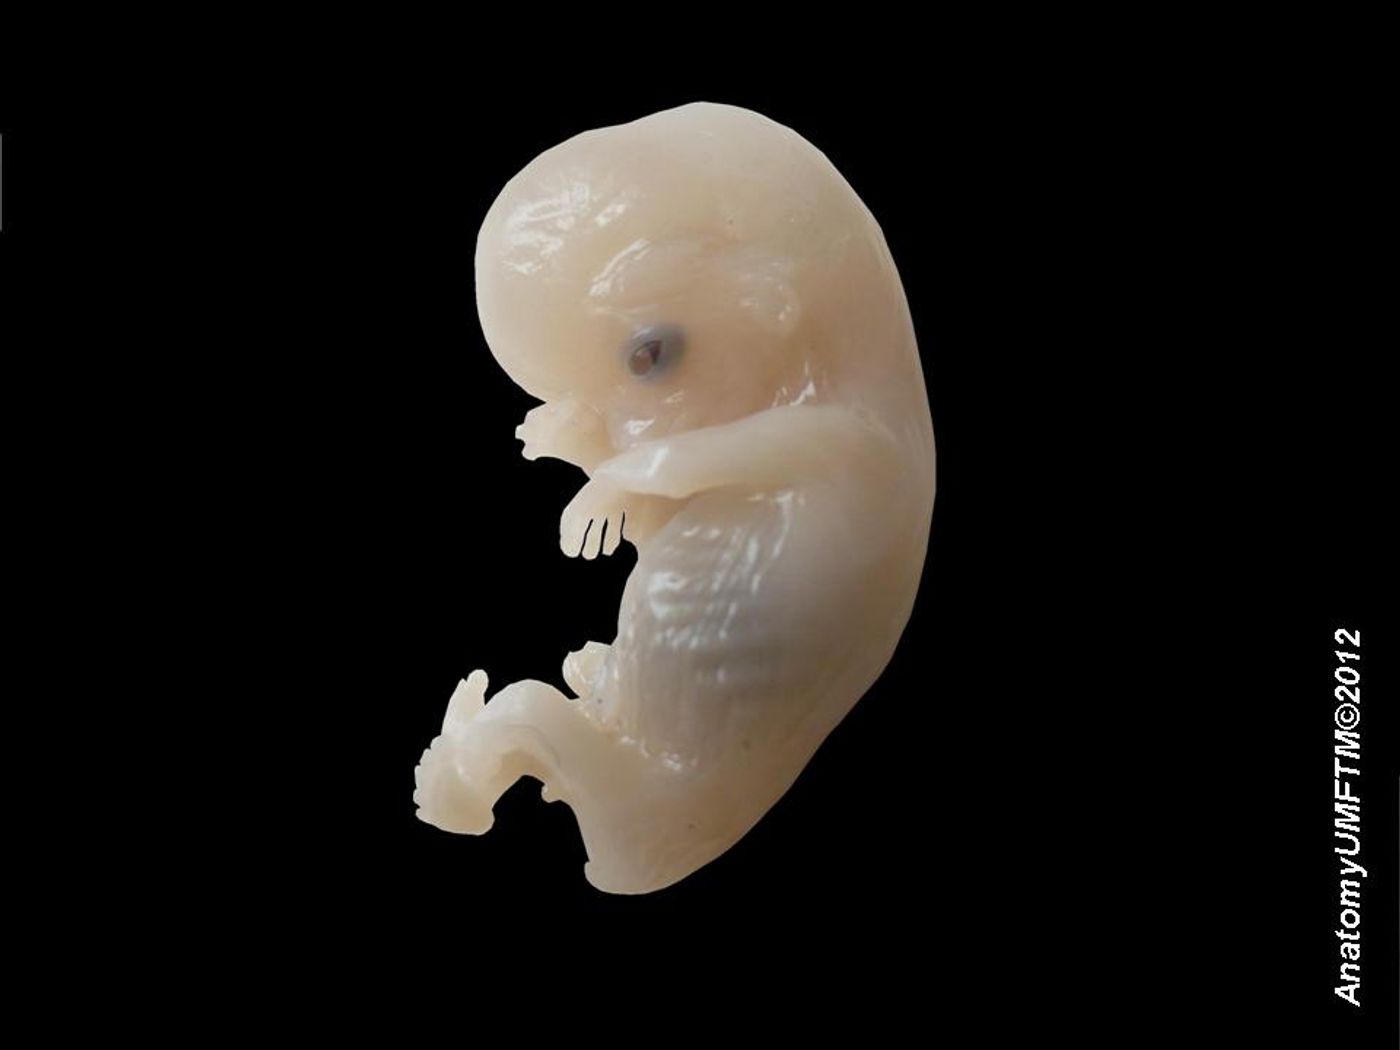 Some mutations now linked to autism risk occur after the zygotic stage of an embryo (human embryo at 8-9 weeks shown) / Credit:Wikimedia Commons/ Anatomist90